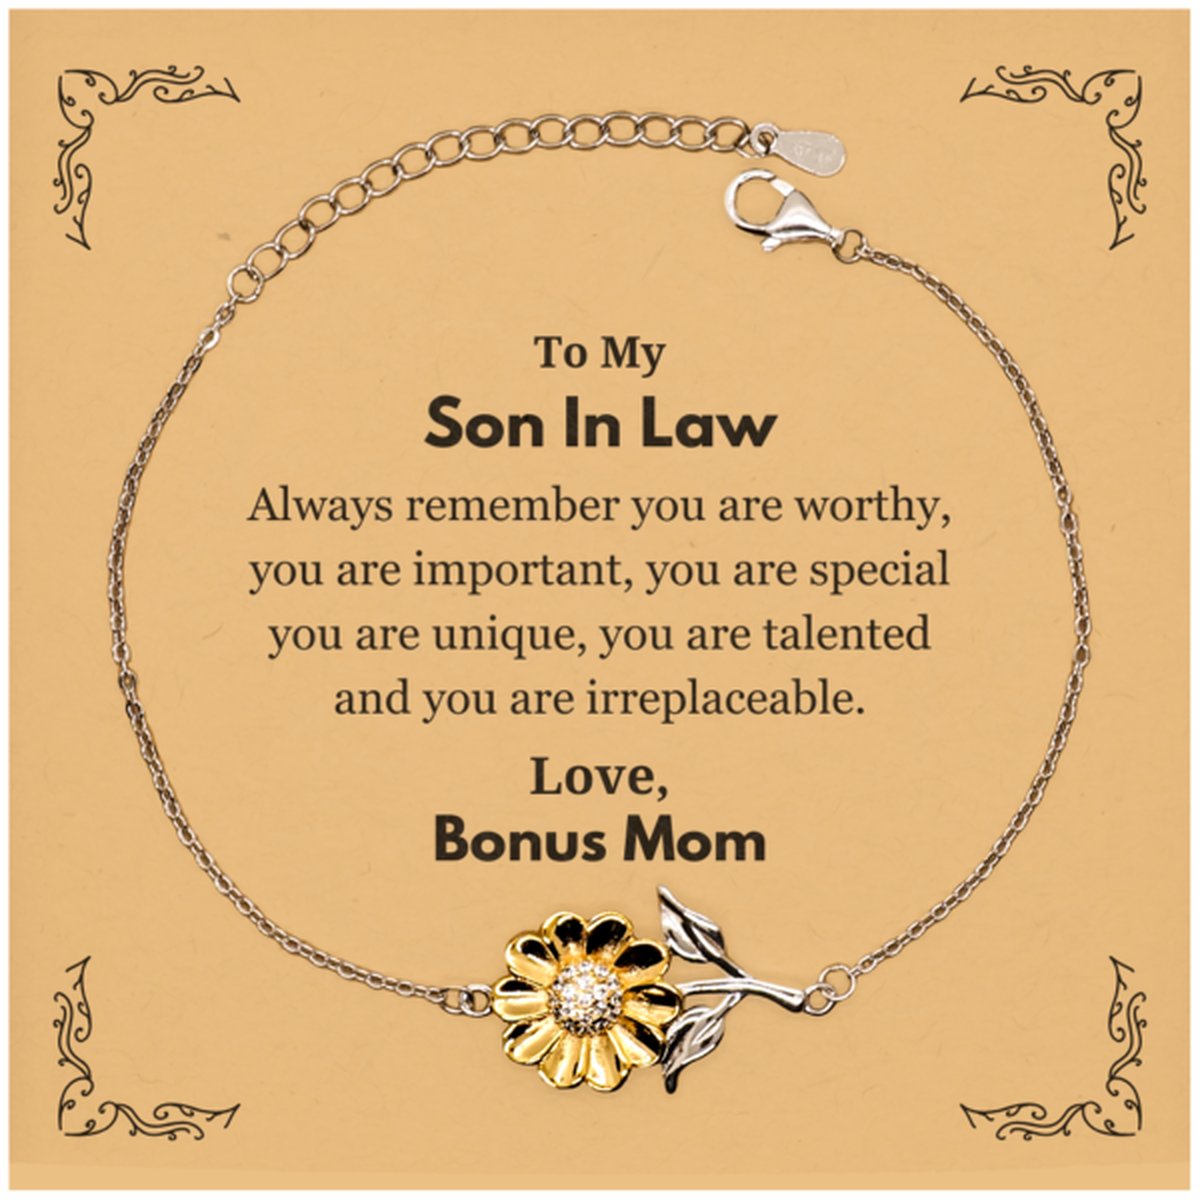 Son In Law Birthday Gifts from Bonus Mom, Inspirational Sunflower Bracelet for Son In Law Christmas Graduation Gifts for Son In Law Always remember you are worthy, you are important. Love, Bonus Mom